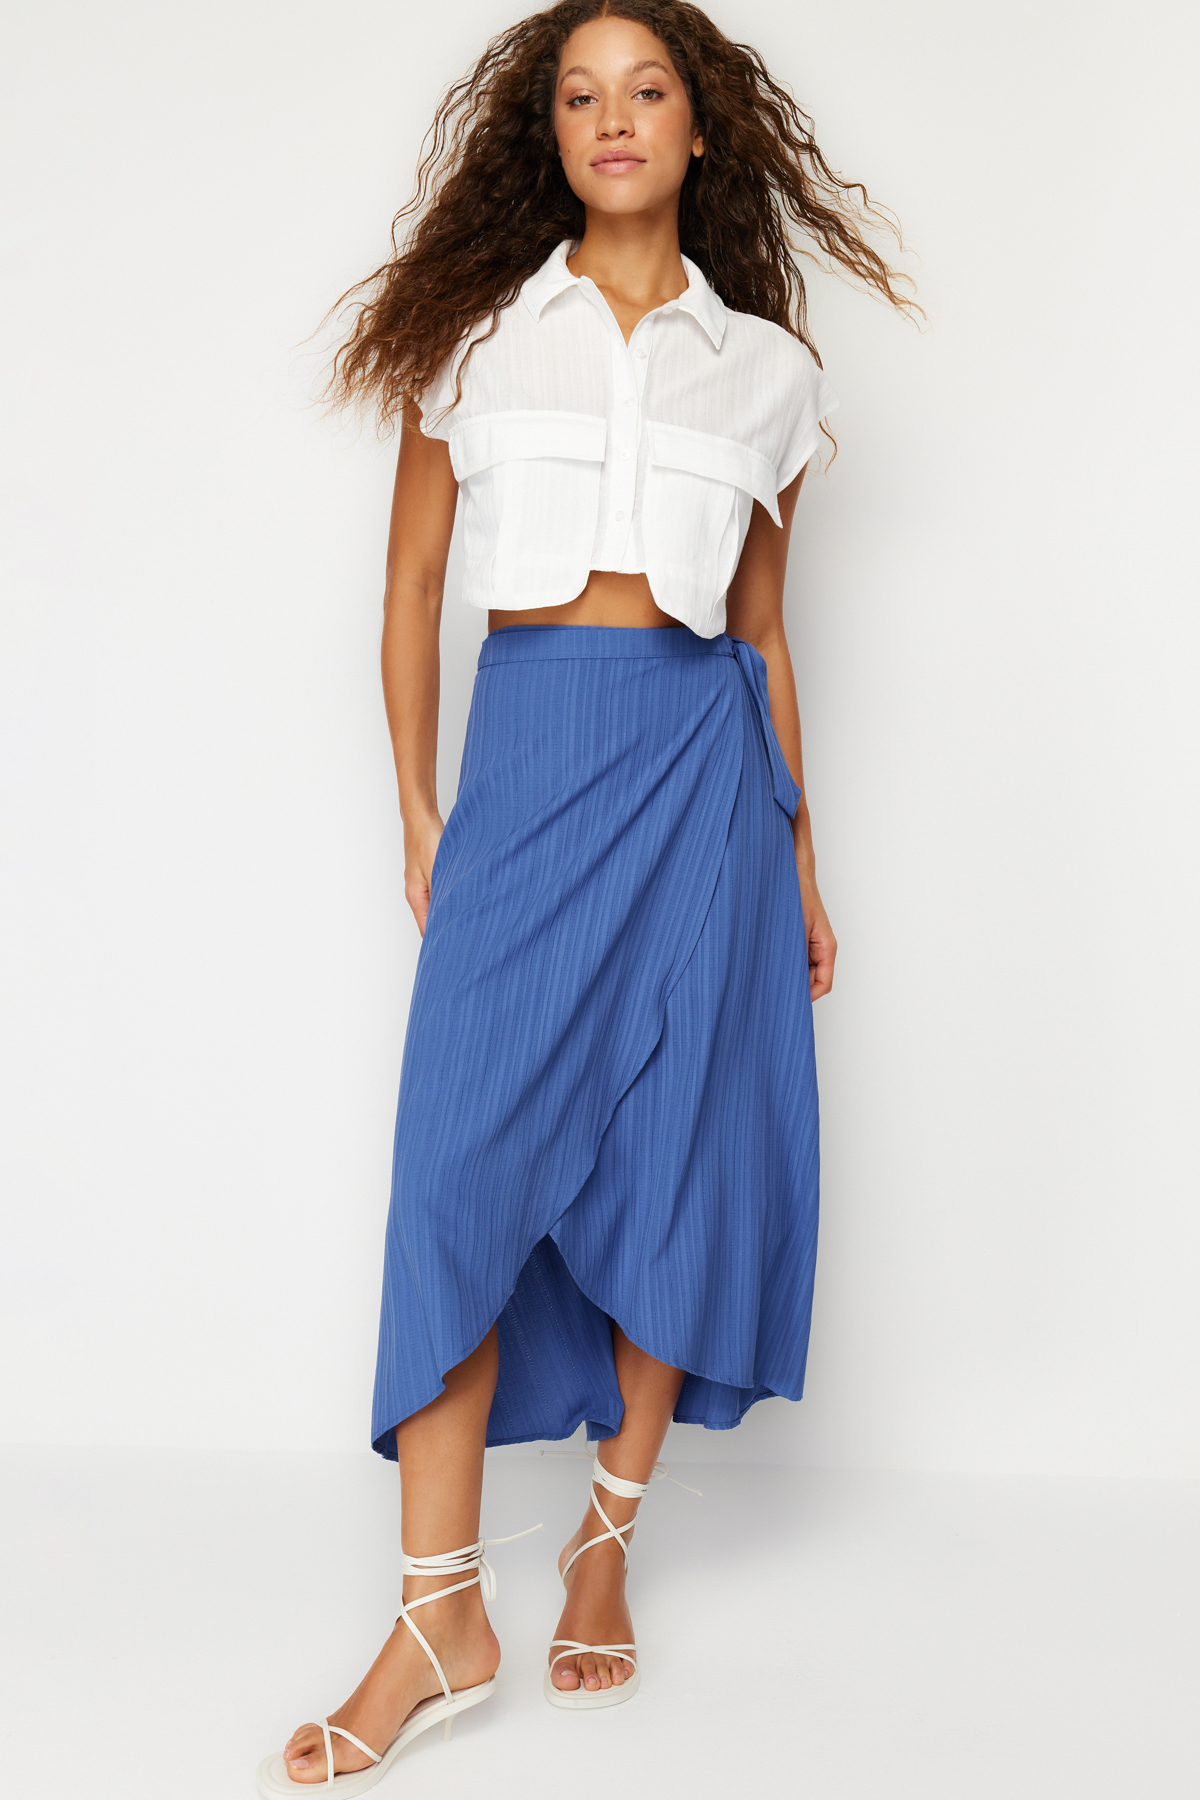 Trendyol Navy Blue Double Breasted Closure Tie Detailed Midi Length Woven Skirt